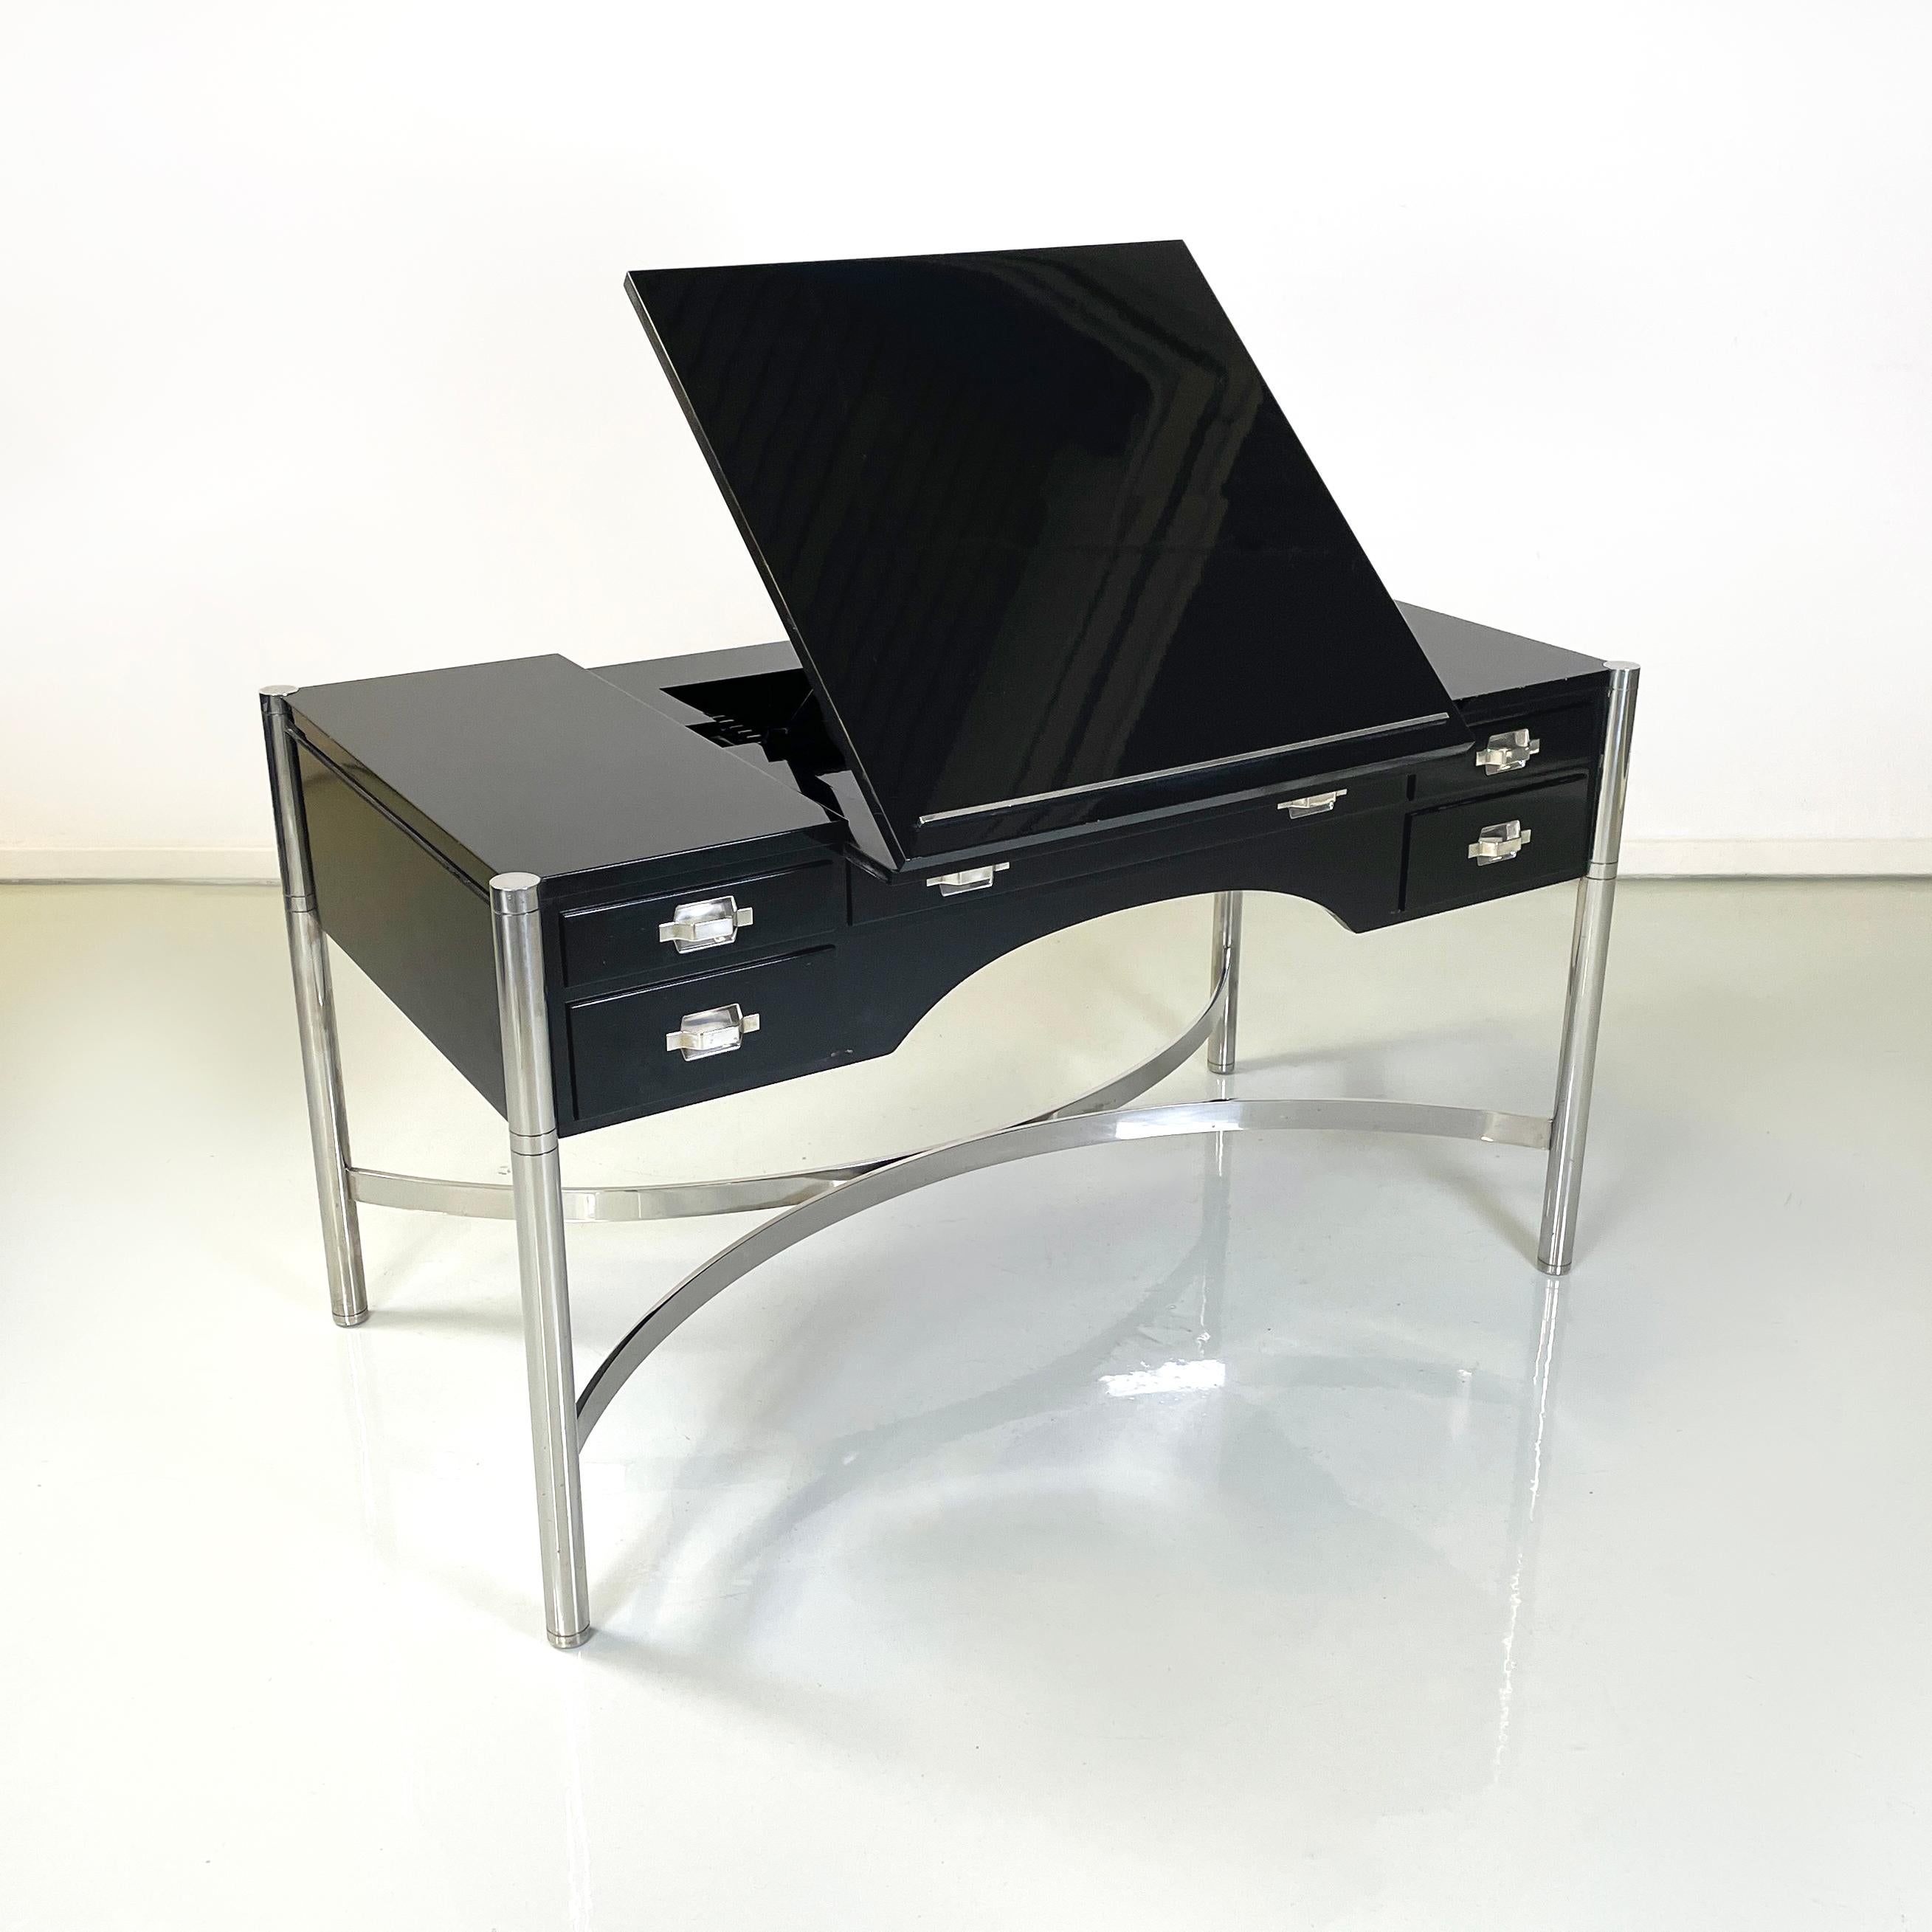 Italian modern Lacquered wood and chromed metal desk by  D.I.D., 1970s
Desk table with rectangular top in black lacquered wood. There is a writing desk with chromed metal detail on the bottom, which can be raised with 5 different degrees of